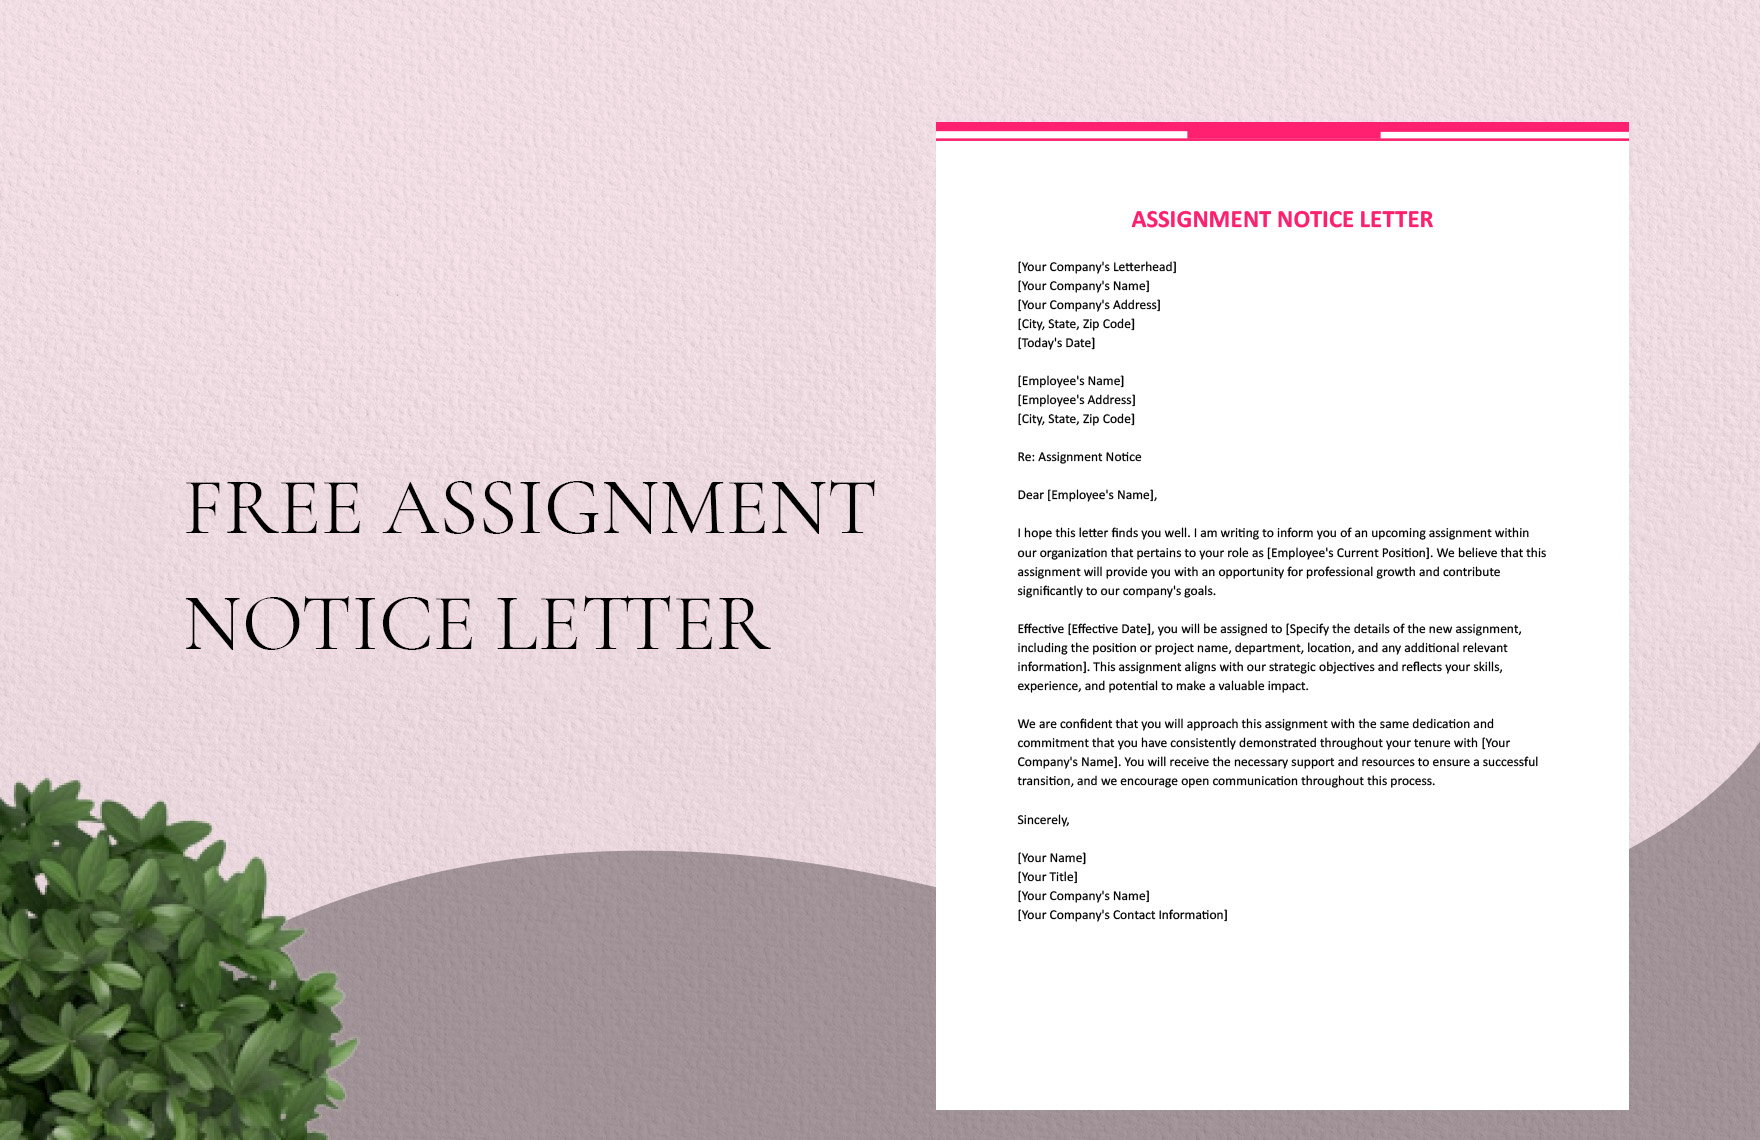 Assignment Notice Letter